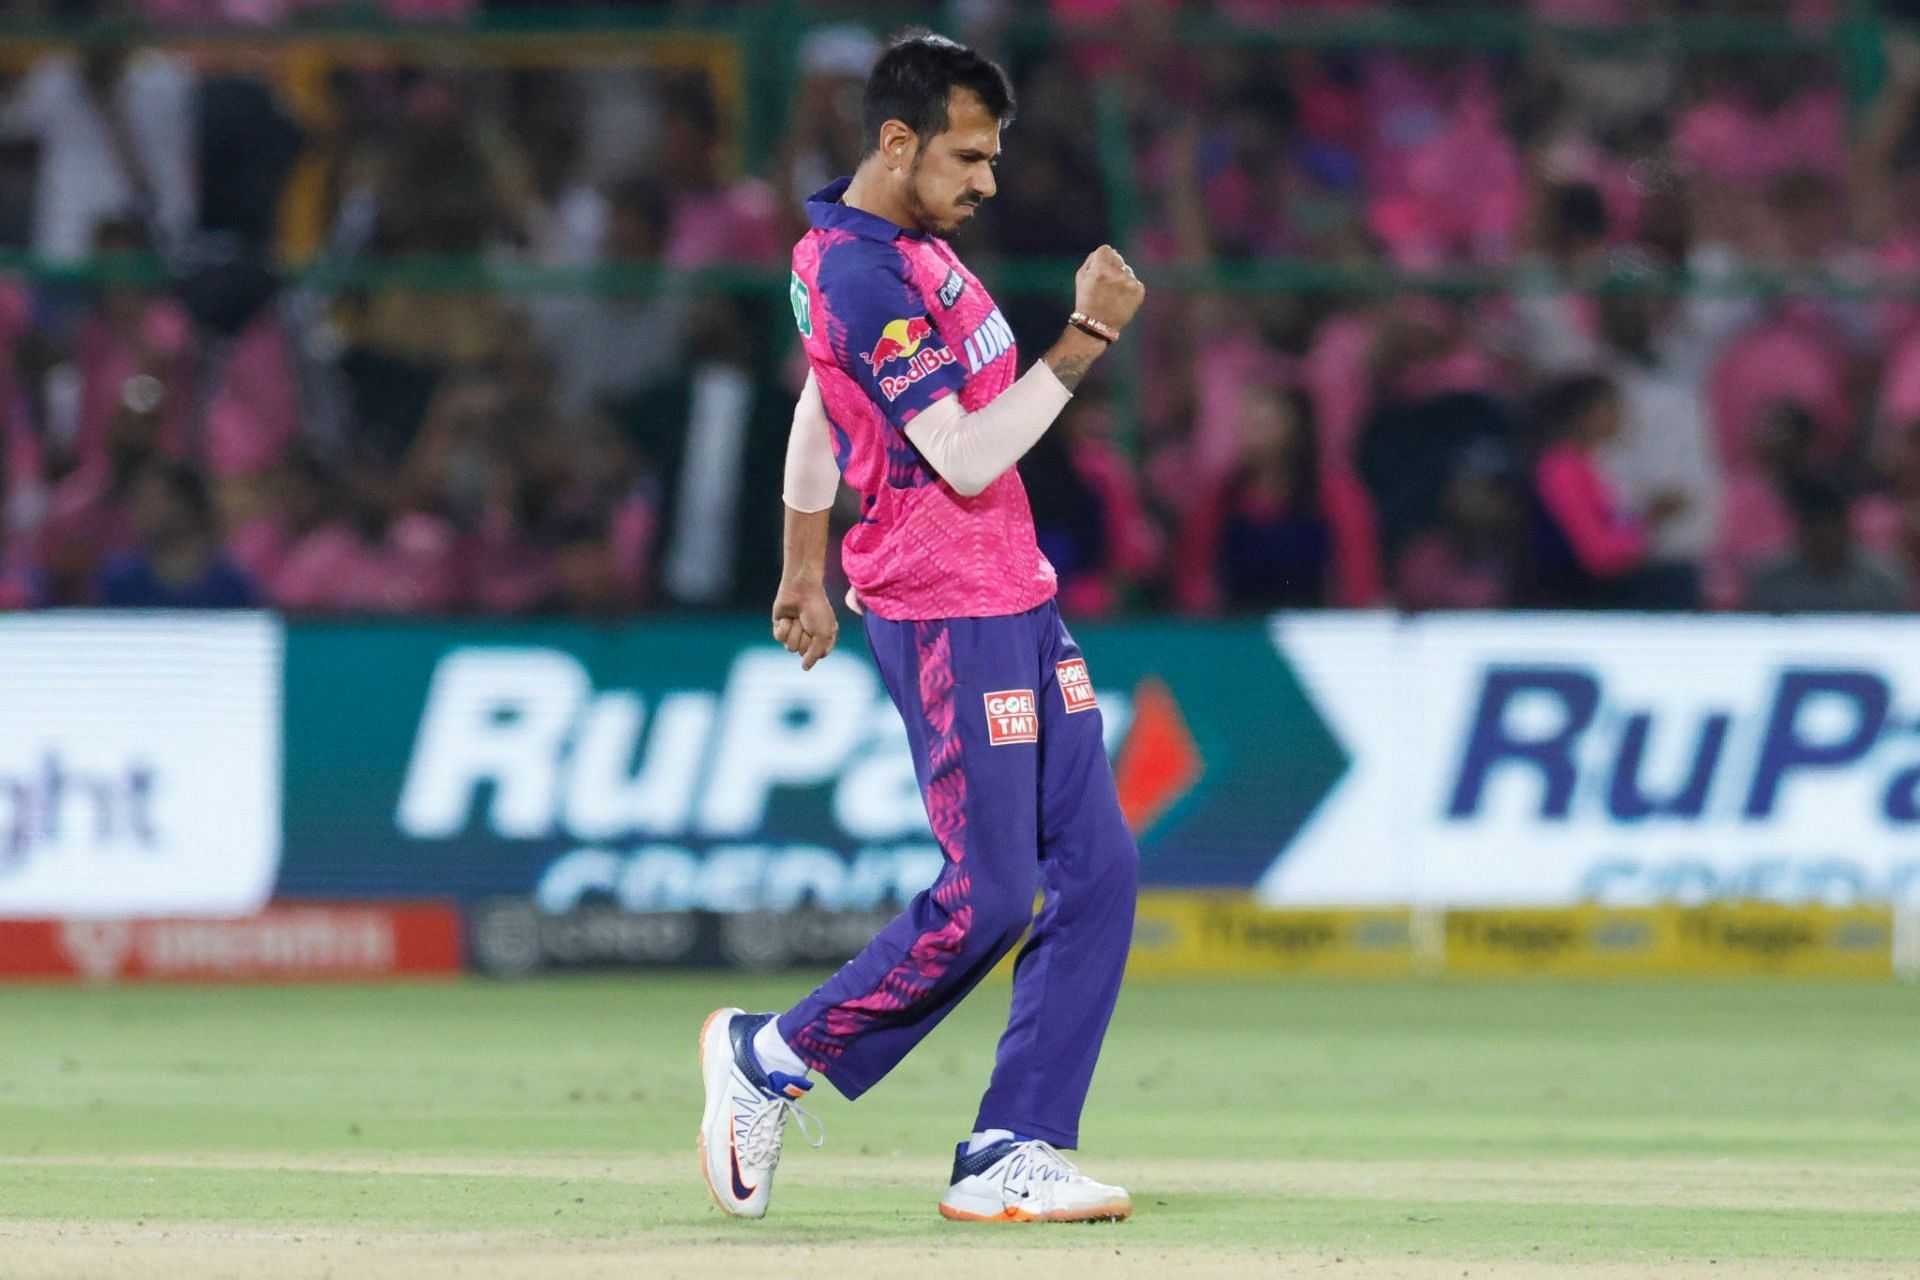 Yuzvendra Chahal after taking a wicket vs SRH [IPLT20]